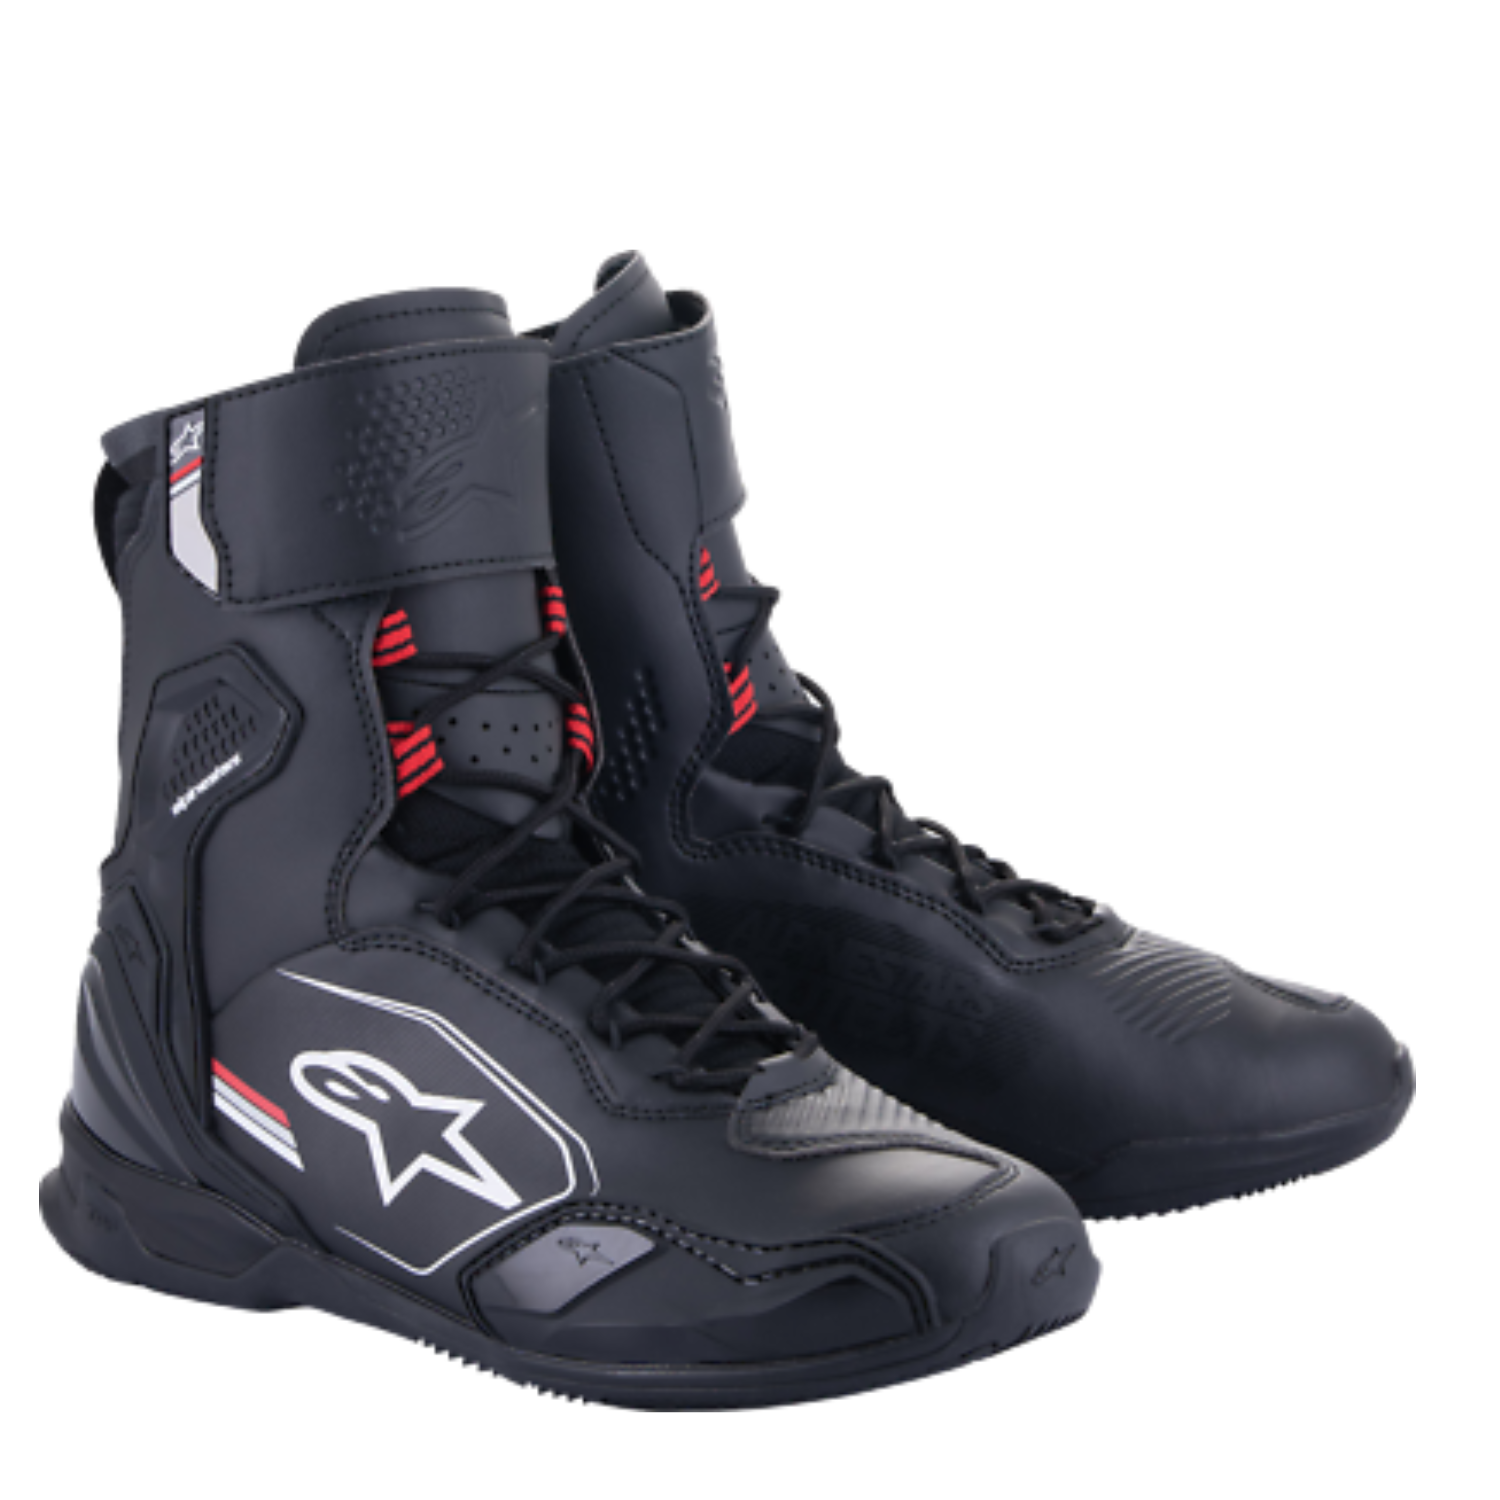 Image of Alpinestars Superfaster Shoes Black Gray Bright Red Size US 65 ID 8059347260754